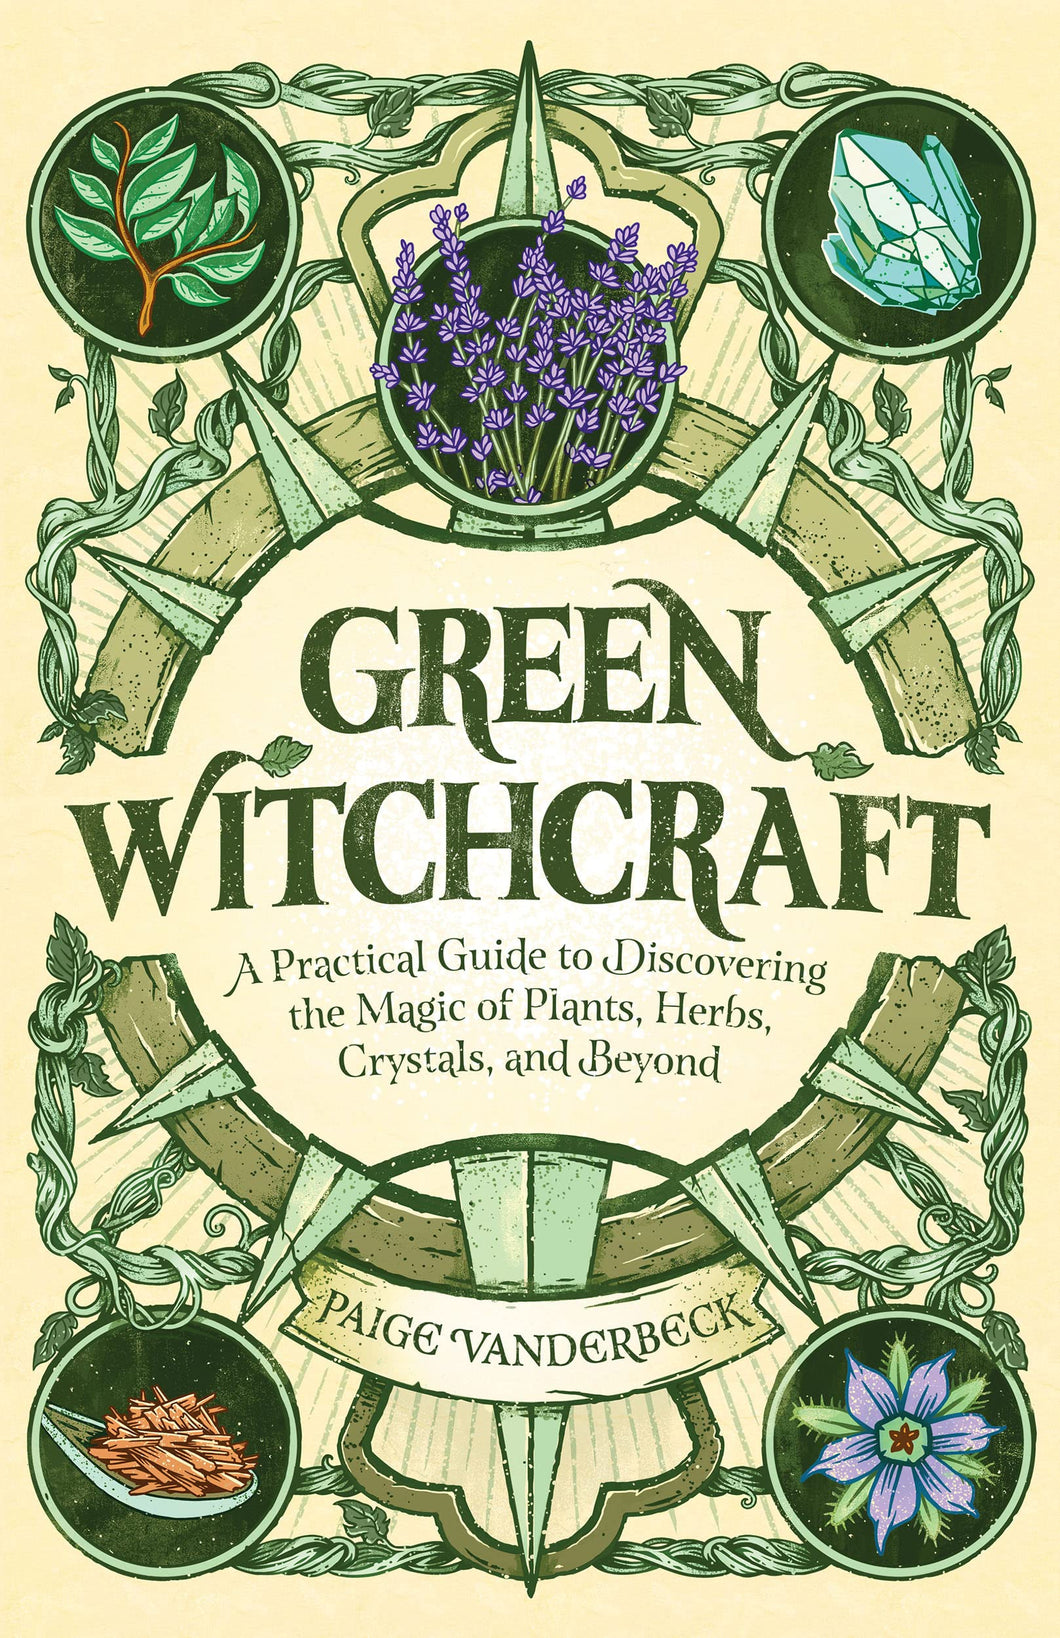 Green Witchcraft by Paige Vanderbeck